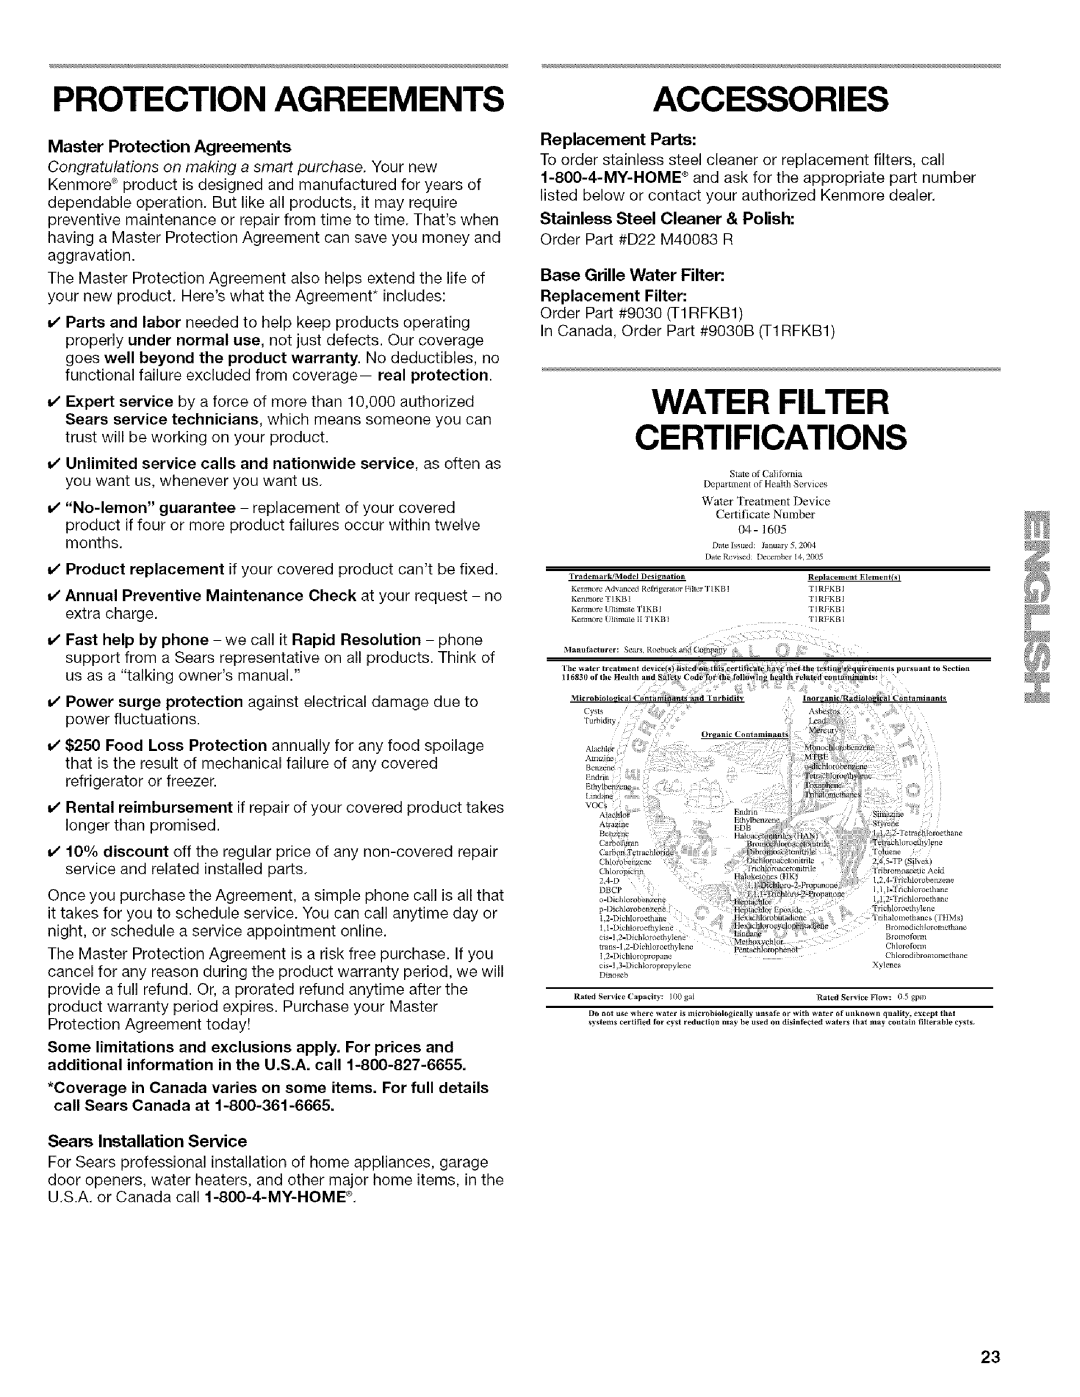 Kenmore WI0151336A Water Filter, Certifications, Accessories, Master Protection Agreements, Sears Installation Service 